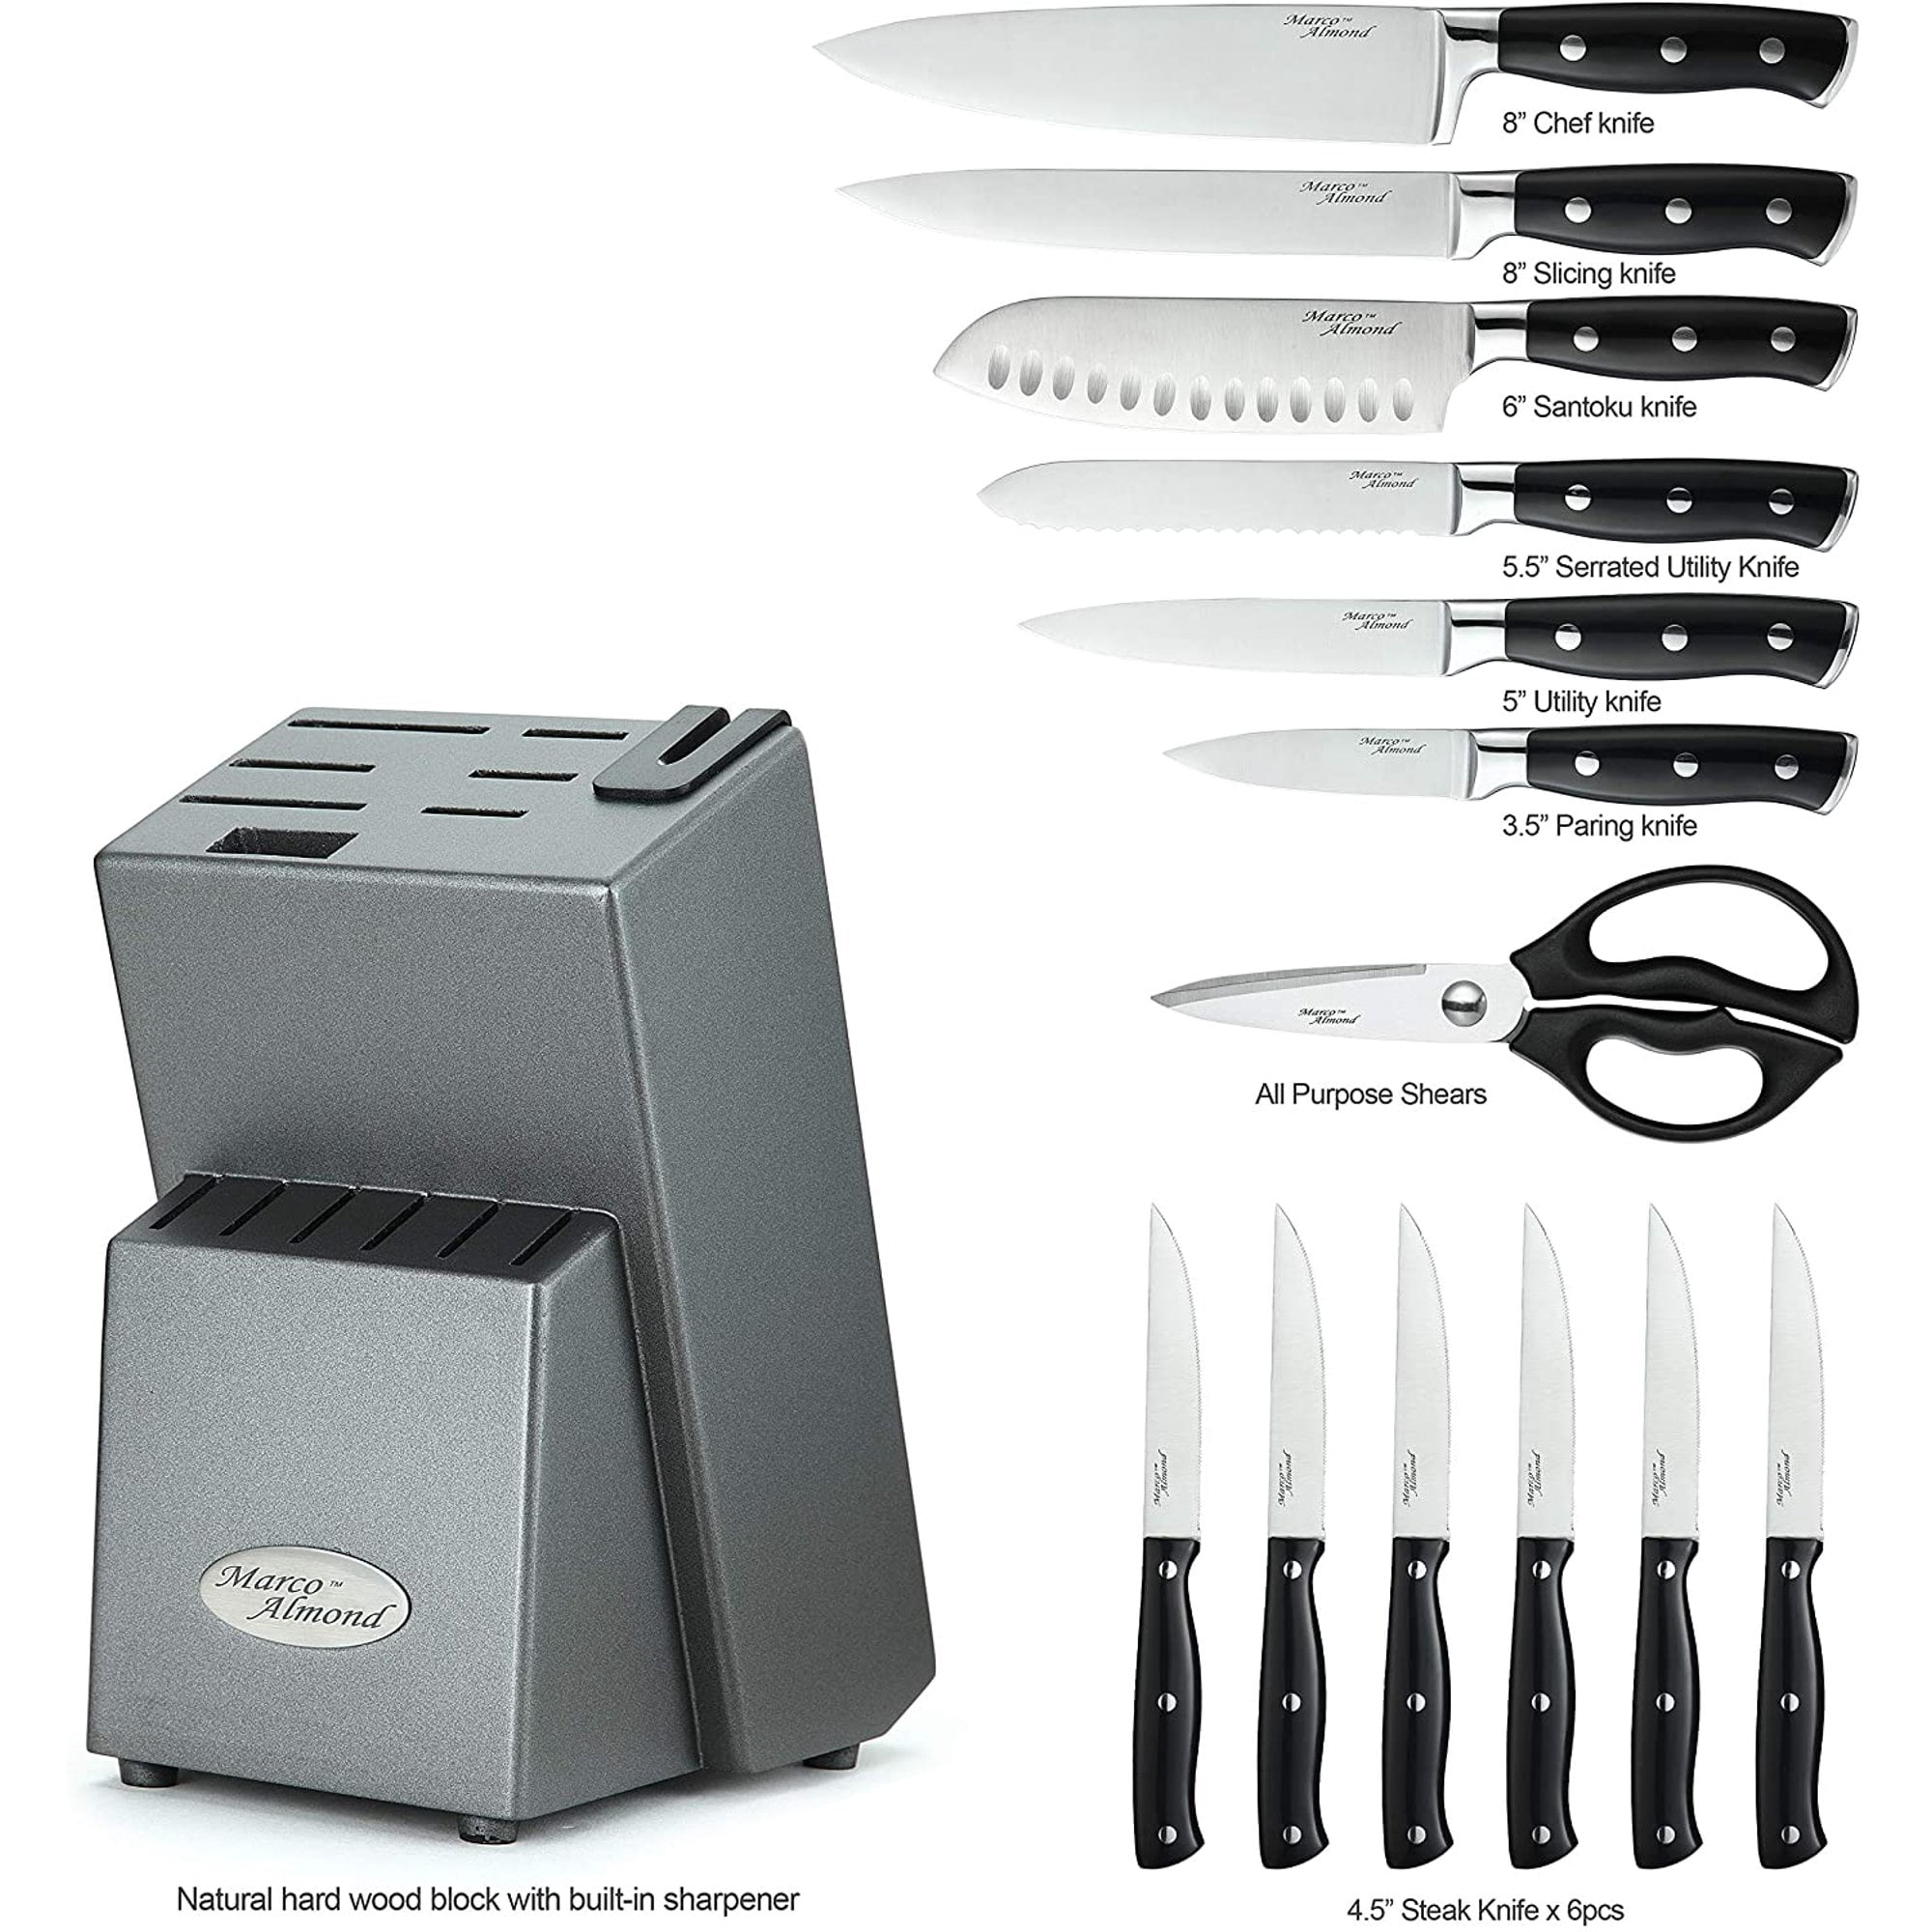 Marco Almond® Kitchen Knife Set MA24, 14 Pieces Stainless Steel Knife Block  Set, Chef Teal Knives Sets for Kitchen with White Block